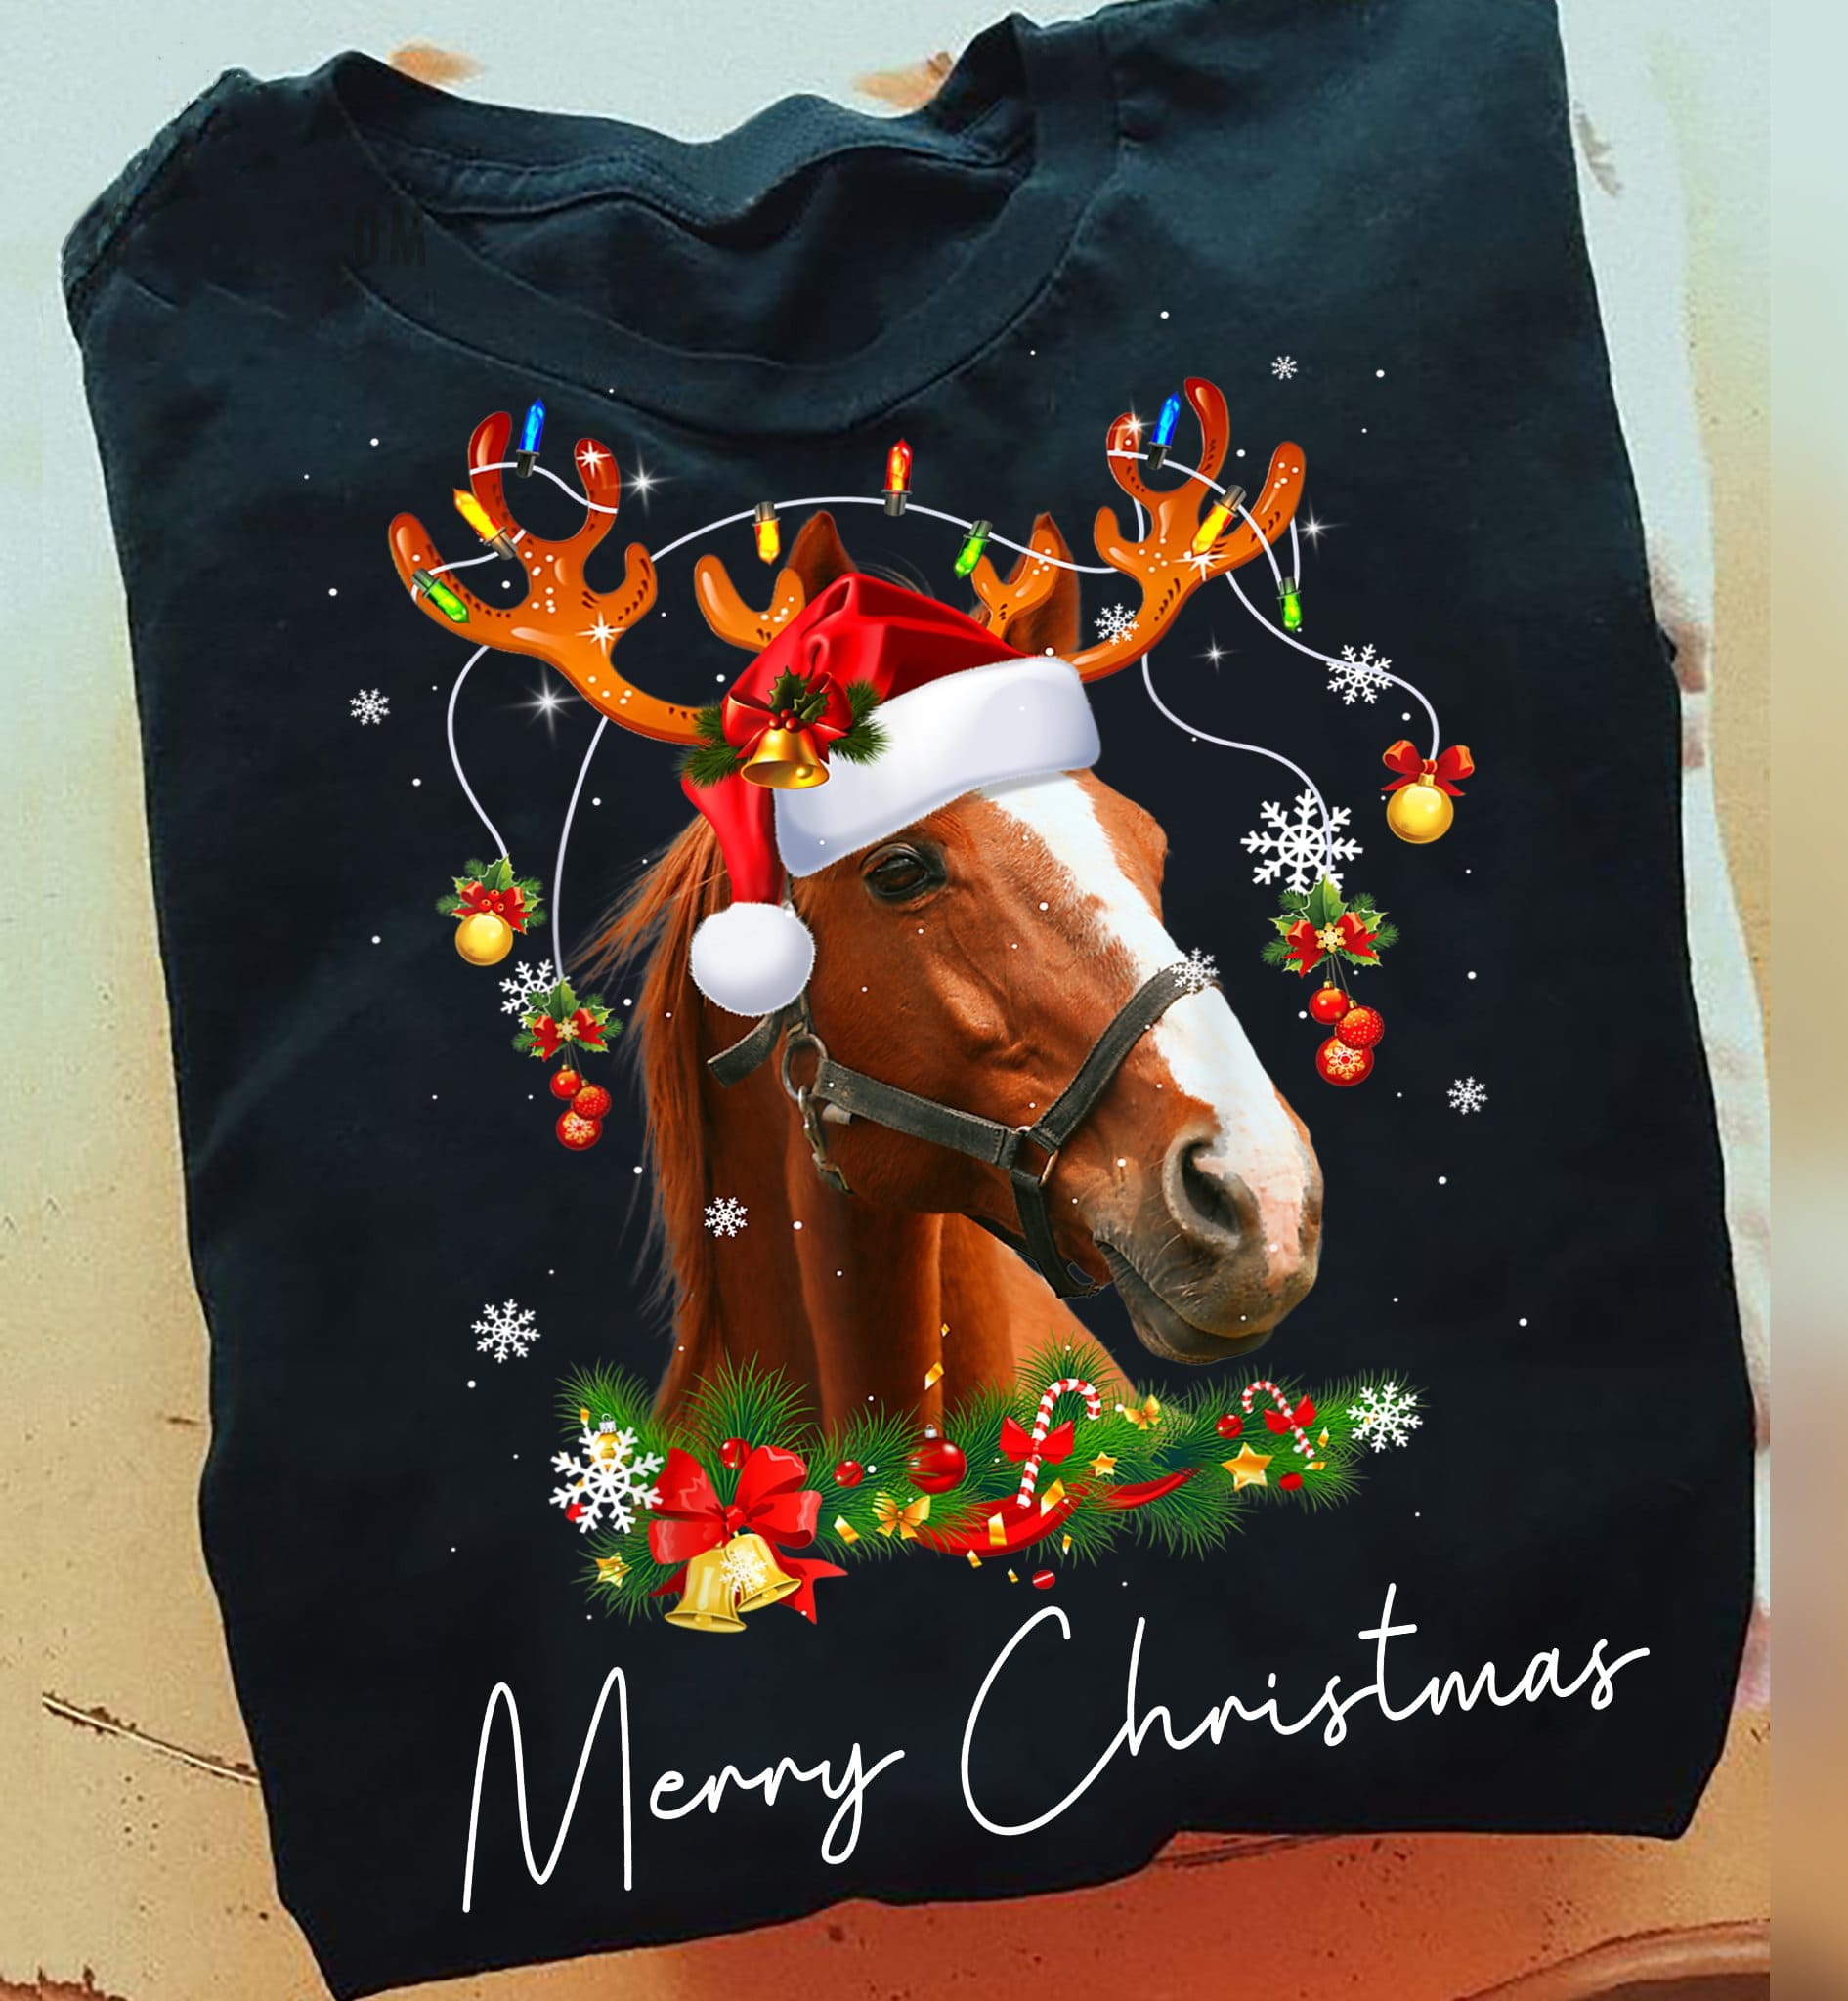 Merry Chritmas - Horse wearing Santa hat, Christmas day ugly sweater